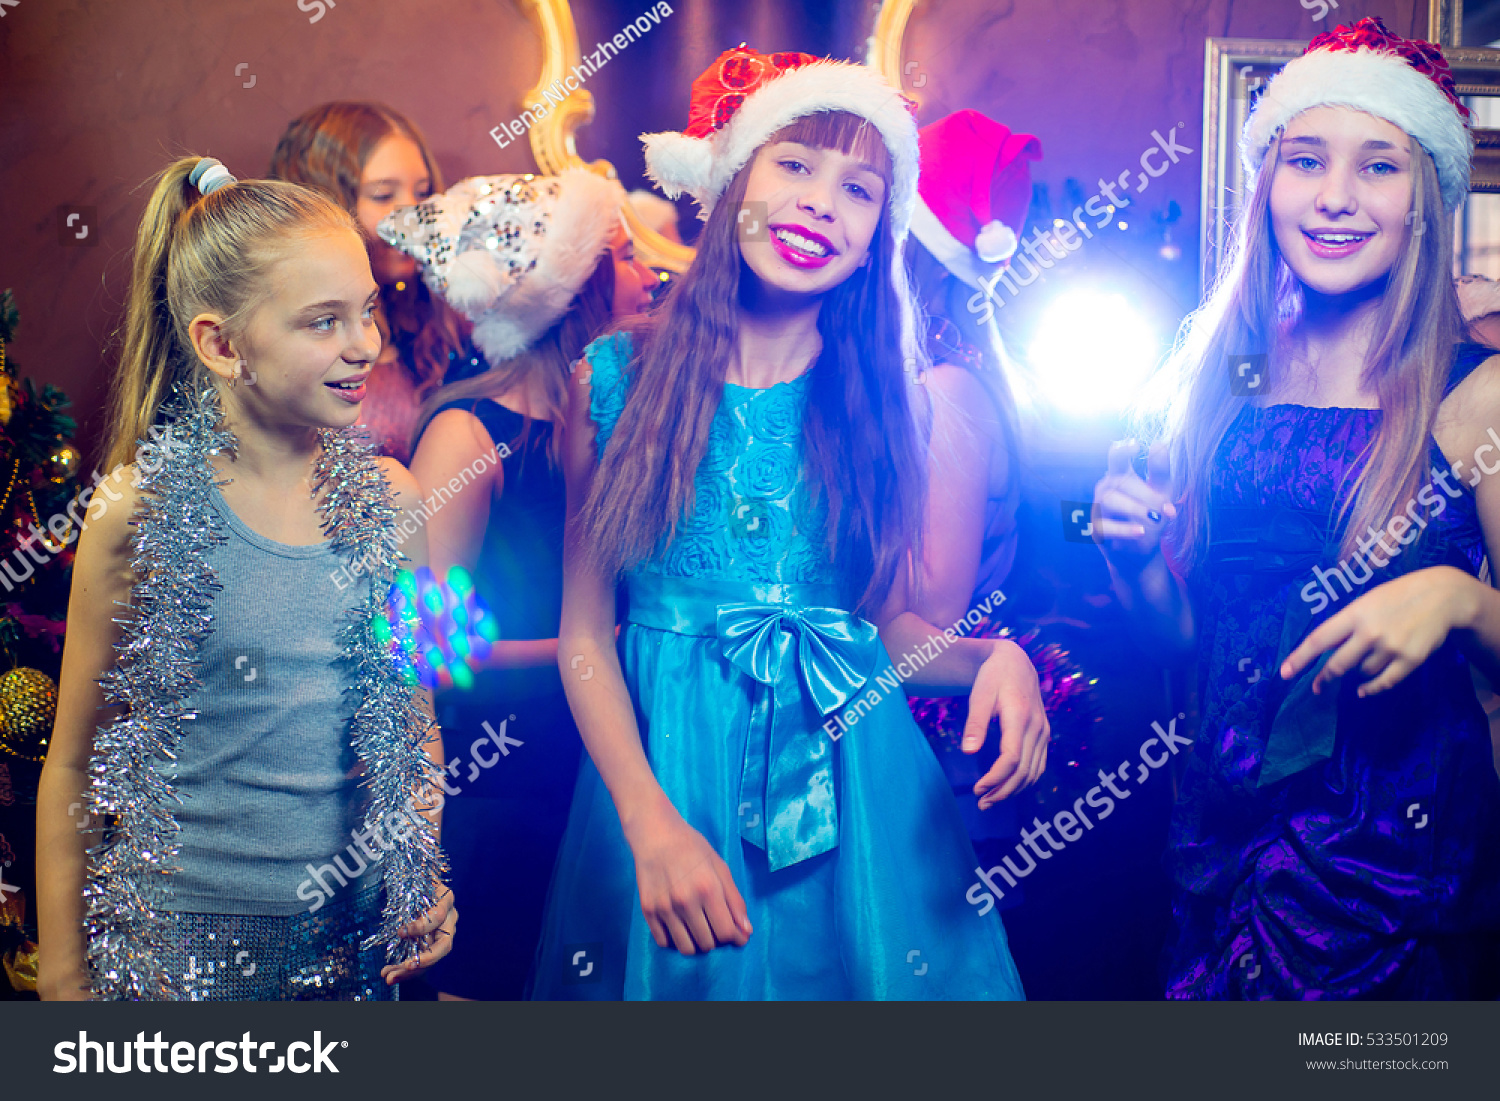 Group of cheerful young girls celebrating Christmas near the Christmas tree with lights #533501209